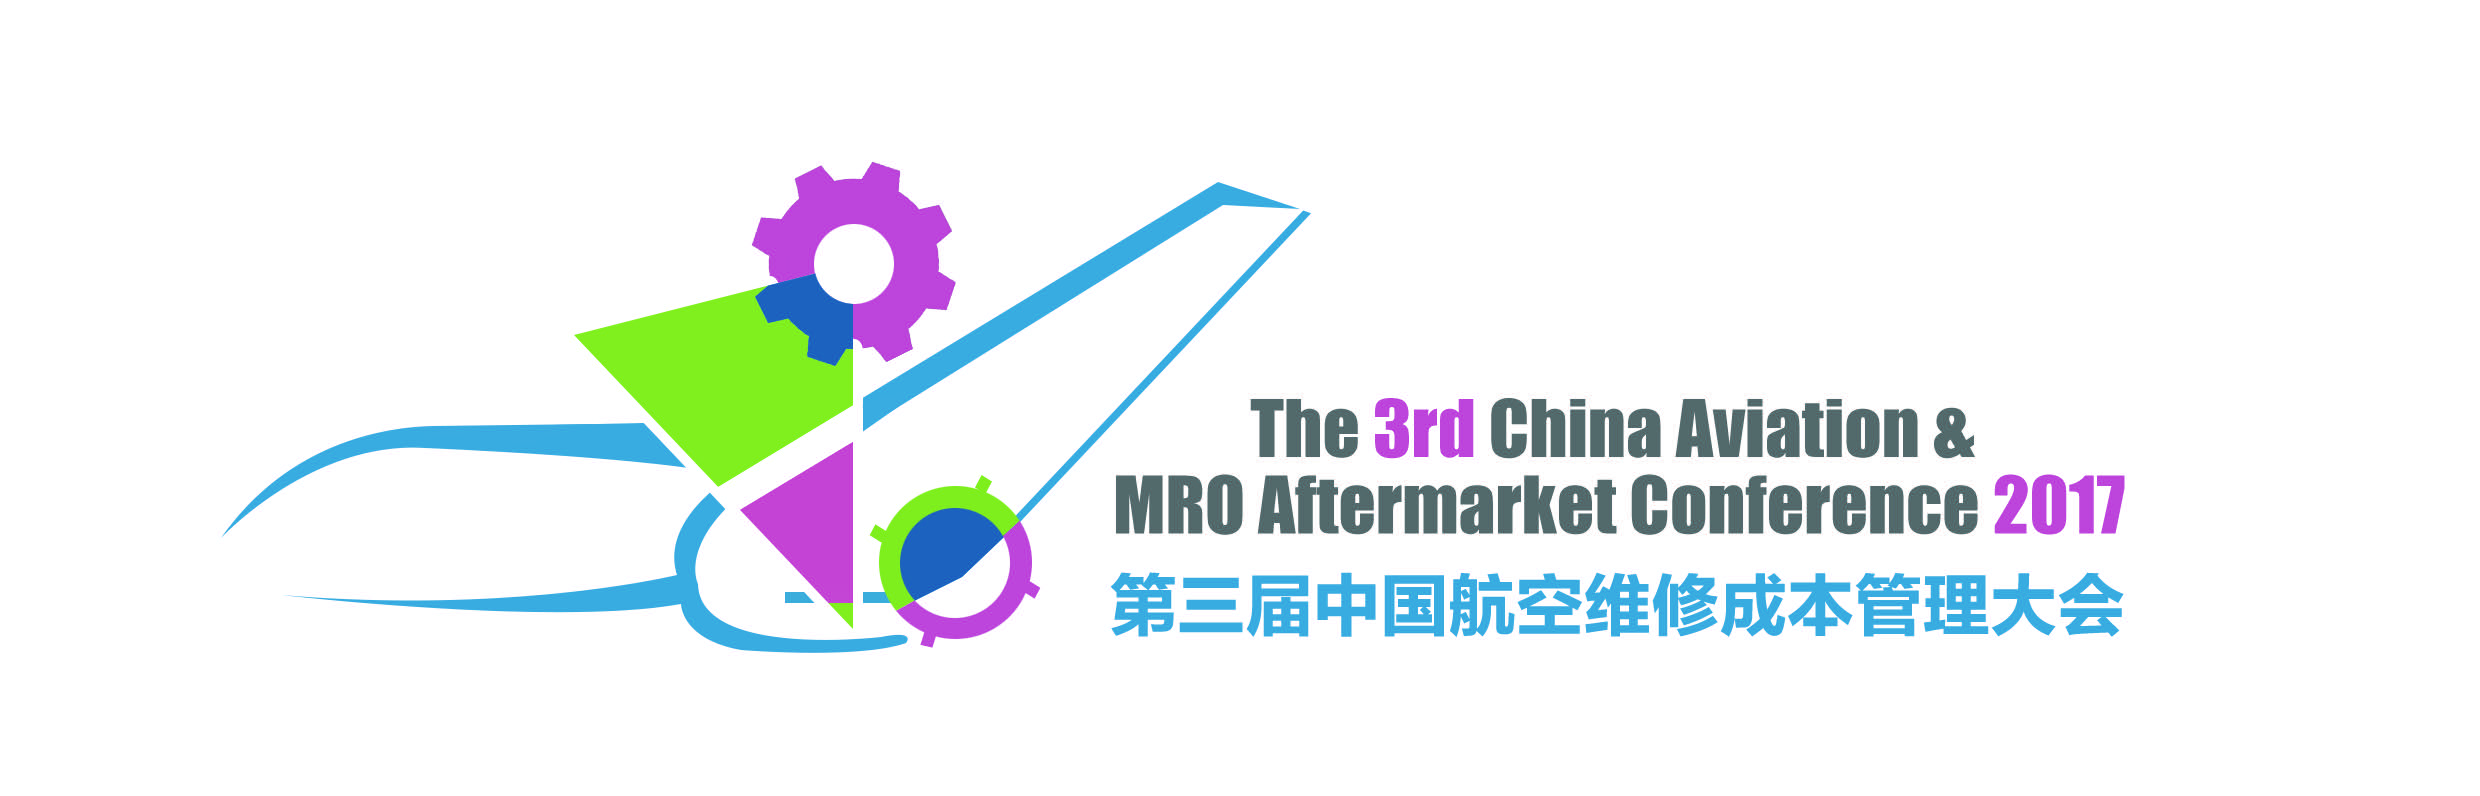 The 3rd China Aviation & MRO Aftermarket Conference 2017